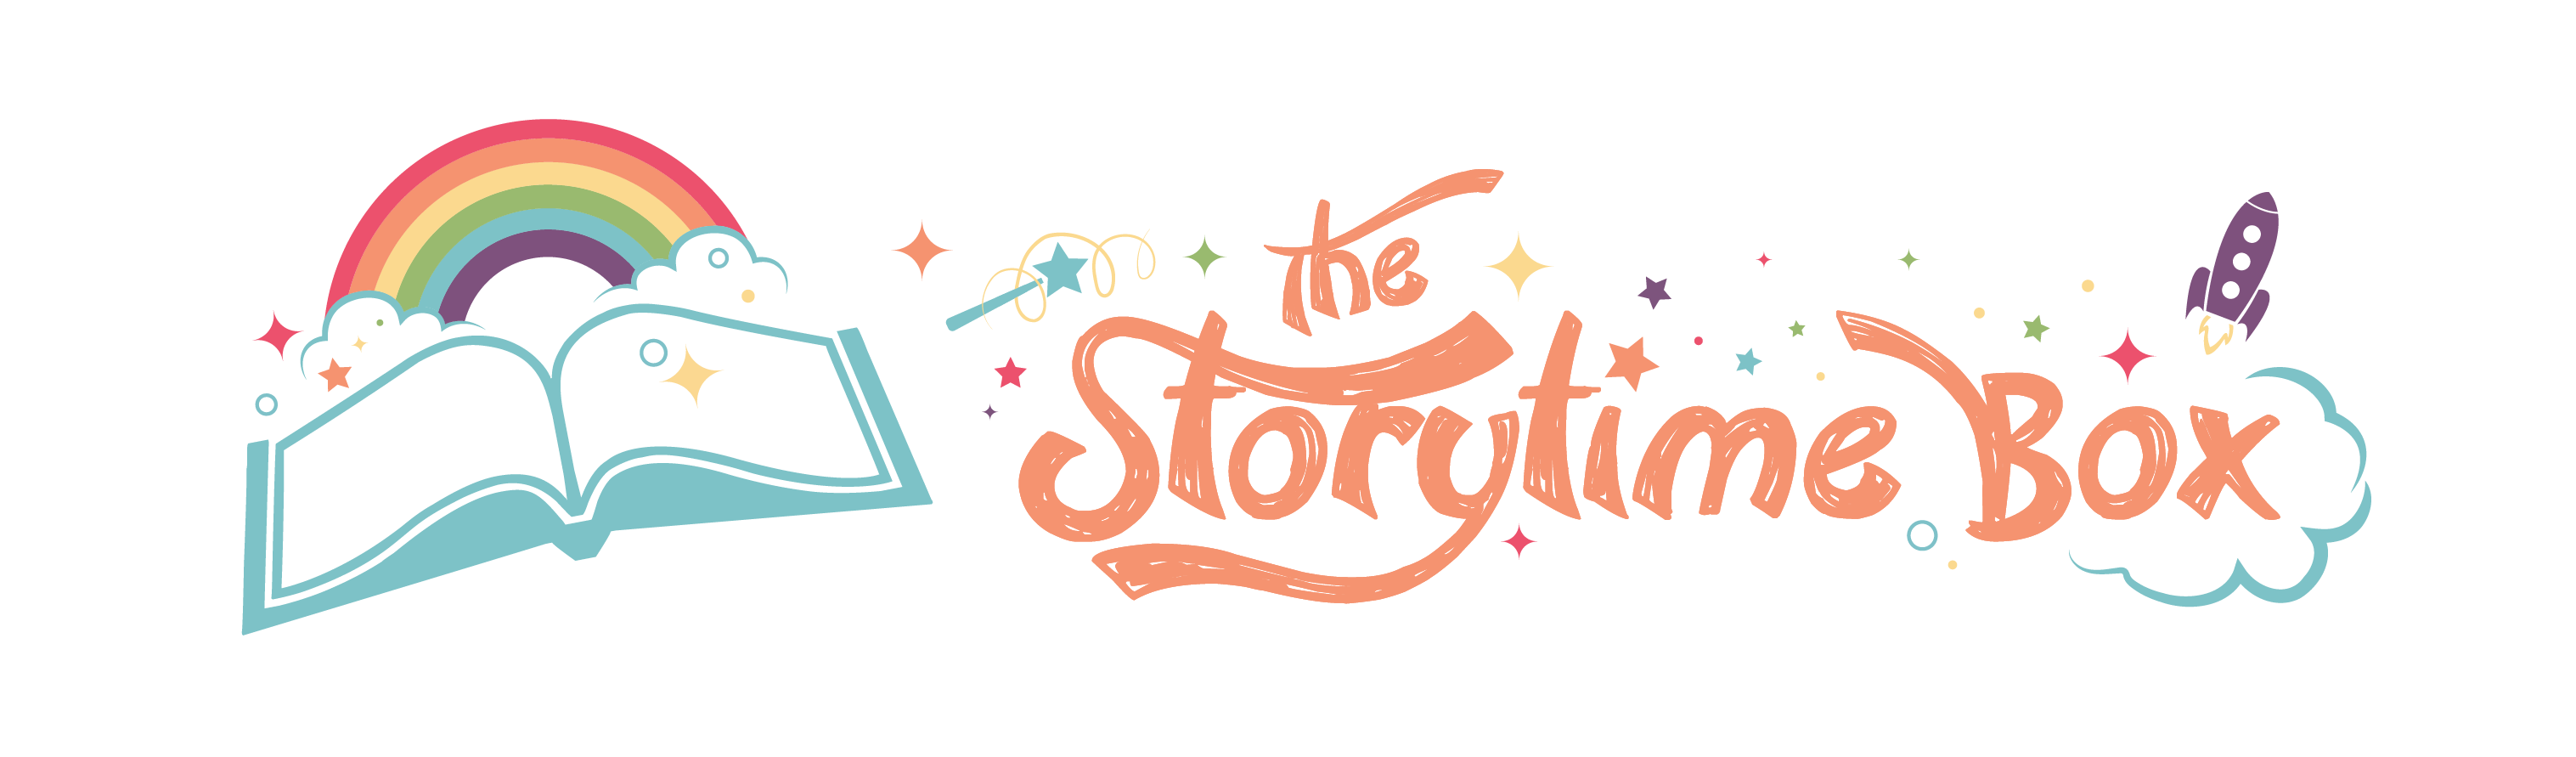 The Storytime Box